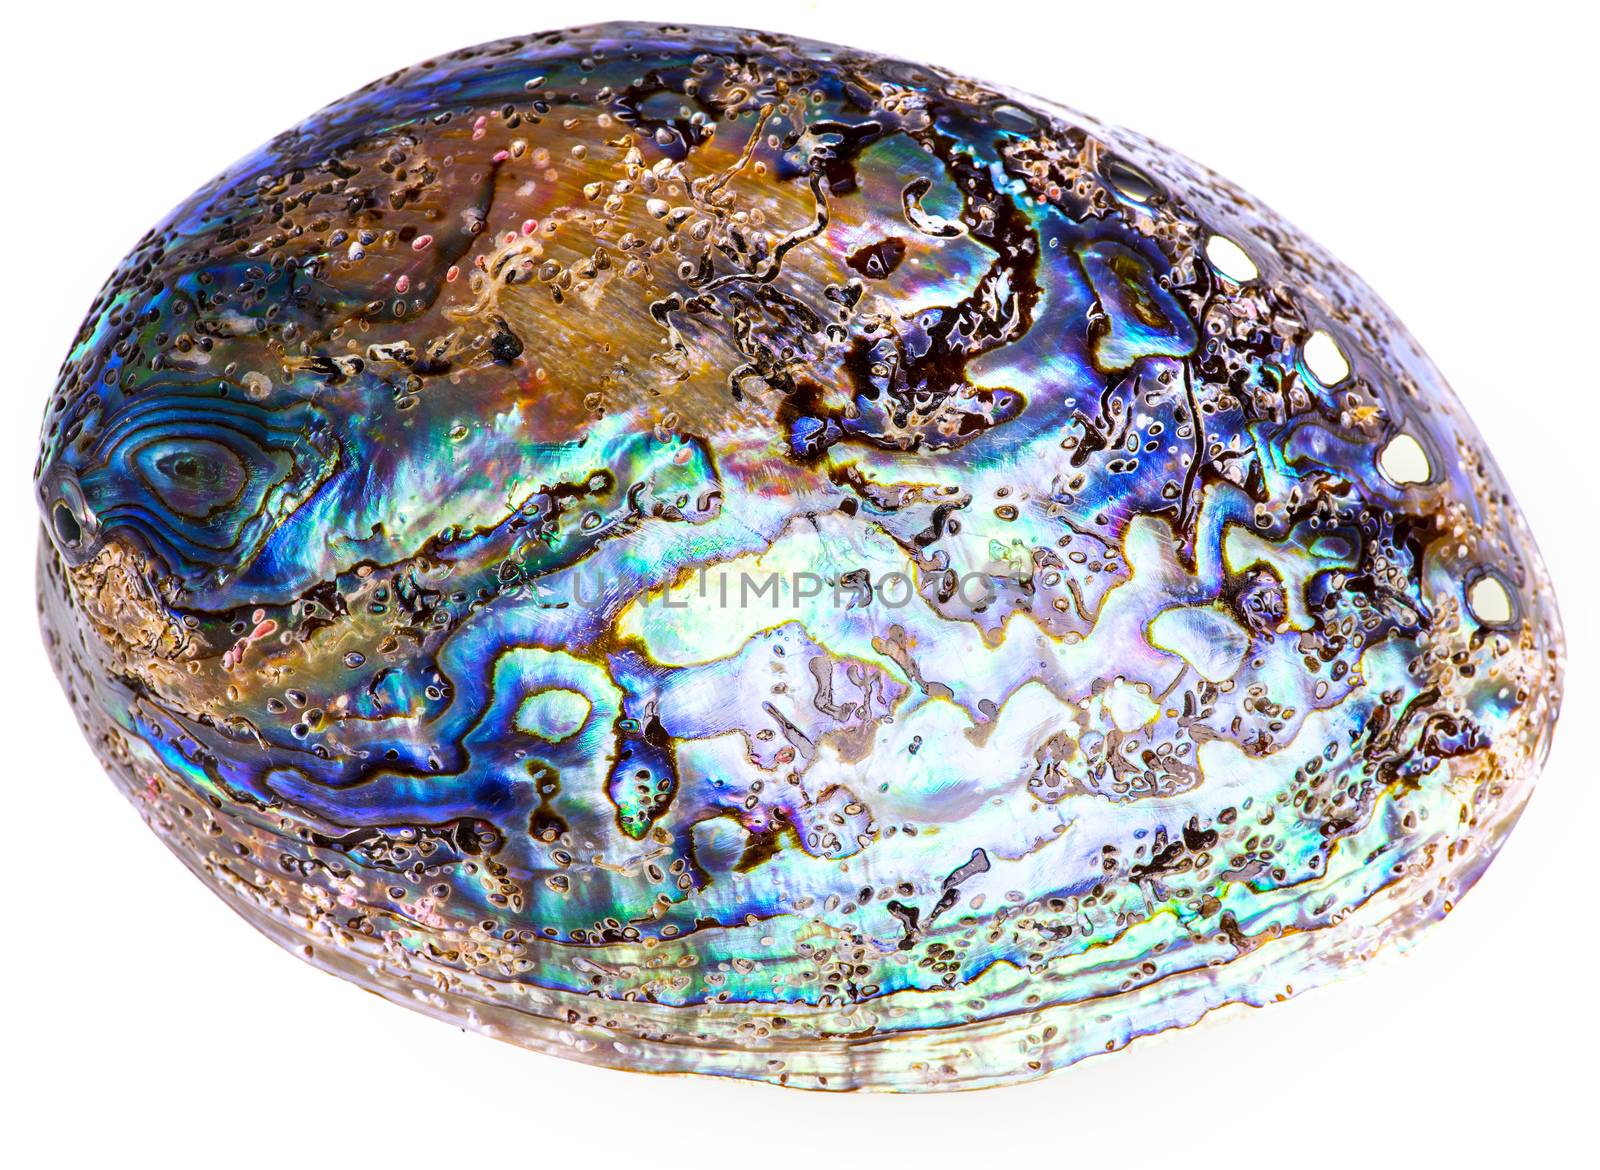 Polished paua abalone sea shell (Haliotis iris) from the New Zealand. Curves and layers are covered with vivid pearl. Isolated on white